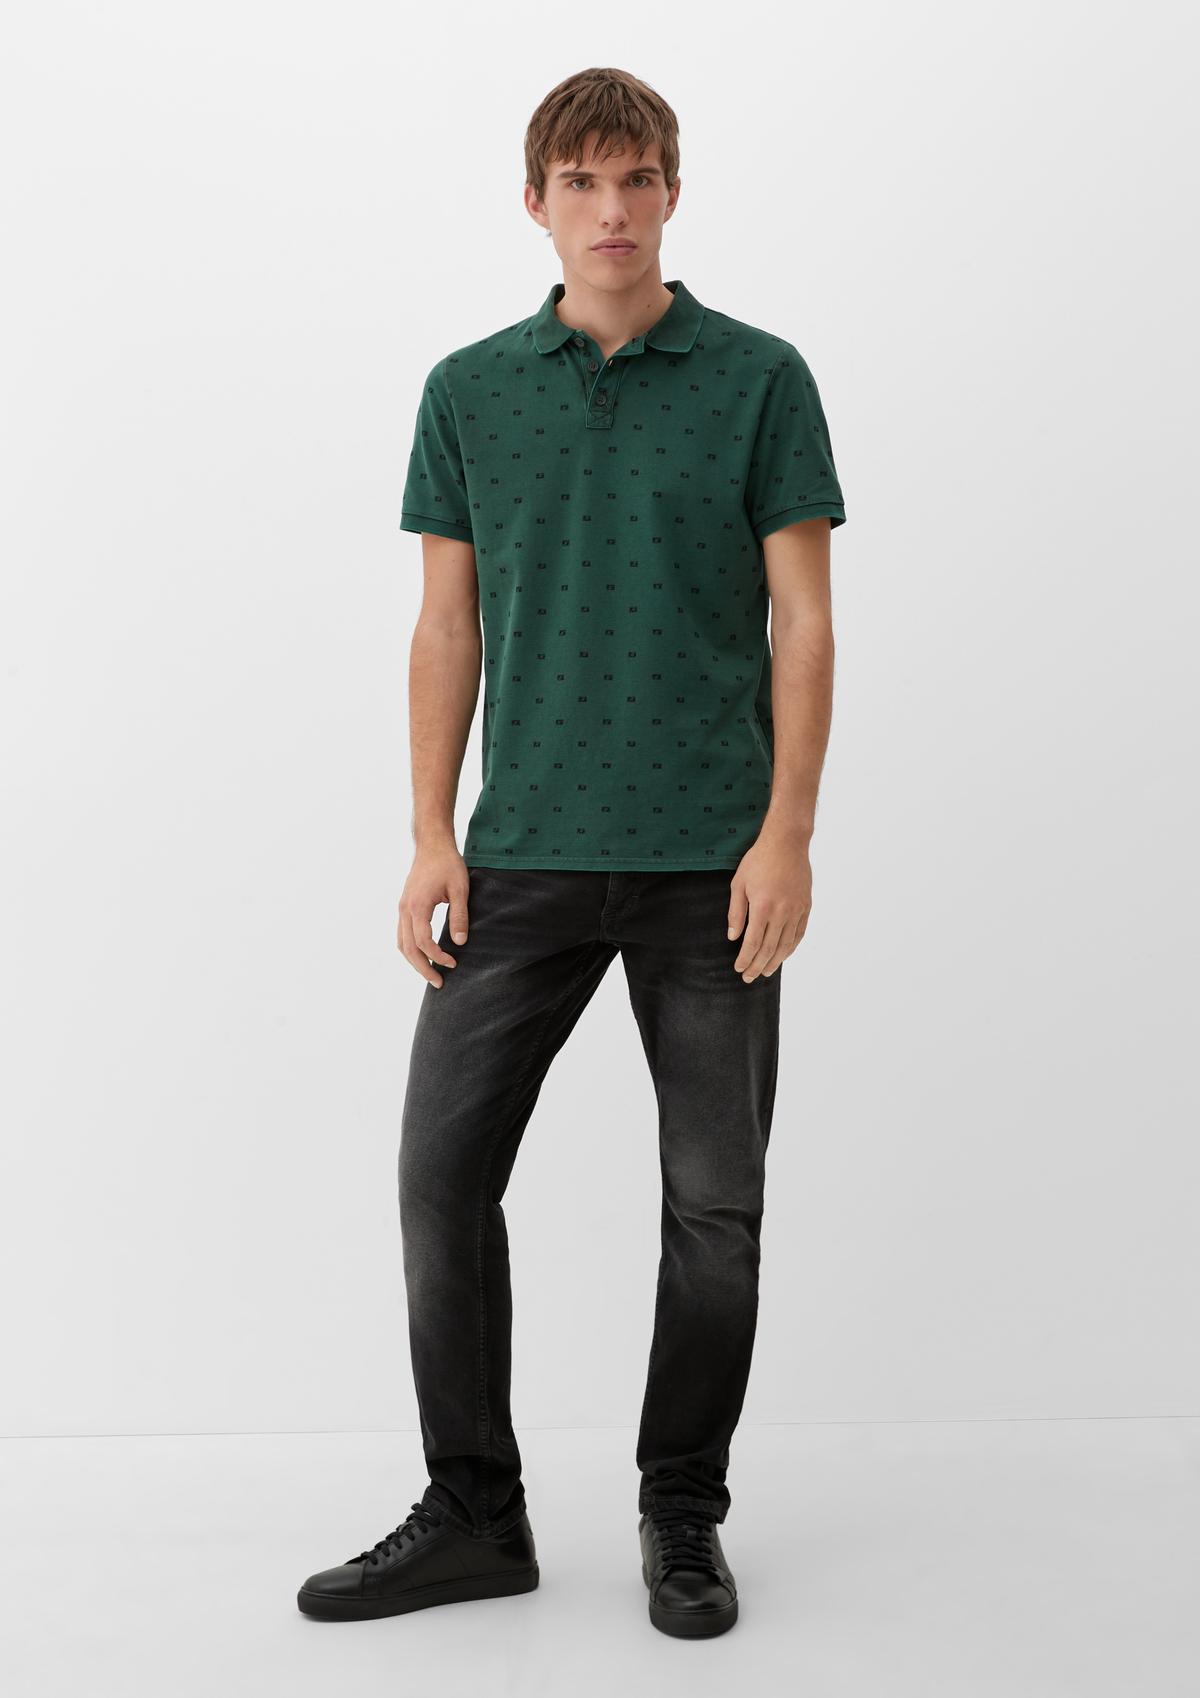 s.Oliver Poloshirt mit Muster-Print